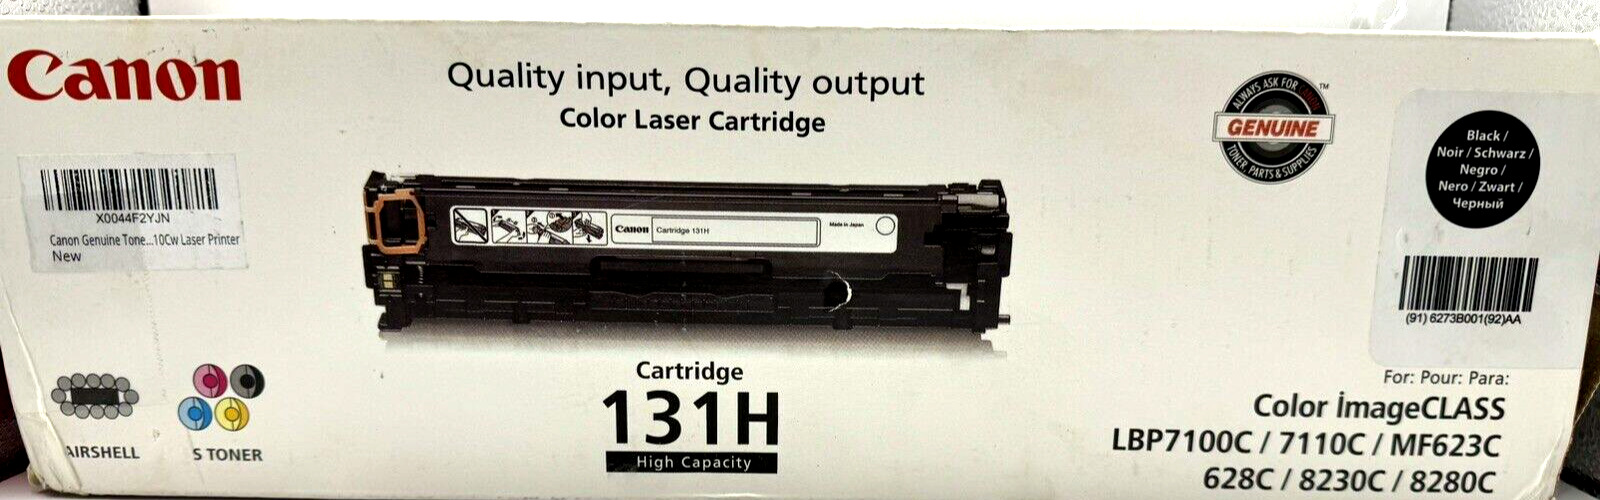 Canon 131H Genuine  Black 2400 Page Yield Toner Cartridge for Canon Image